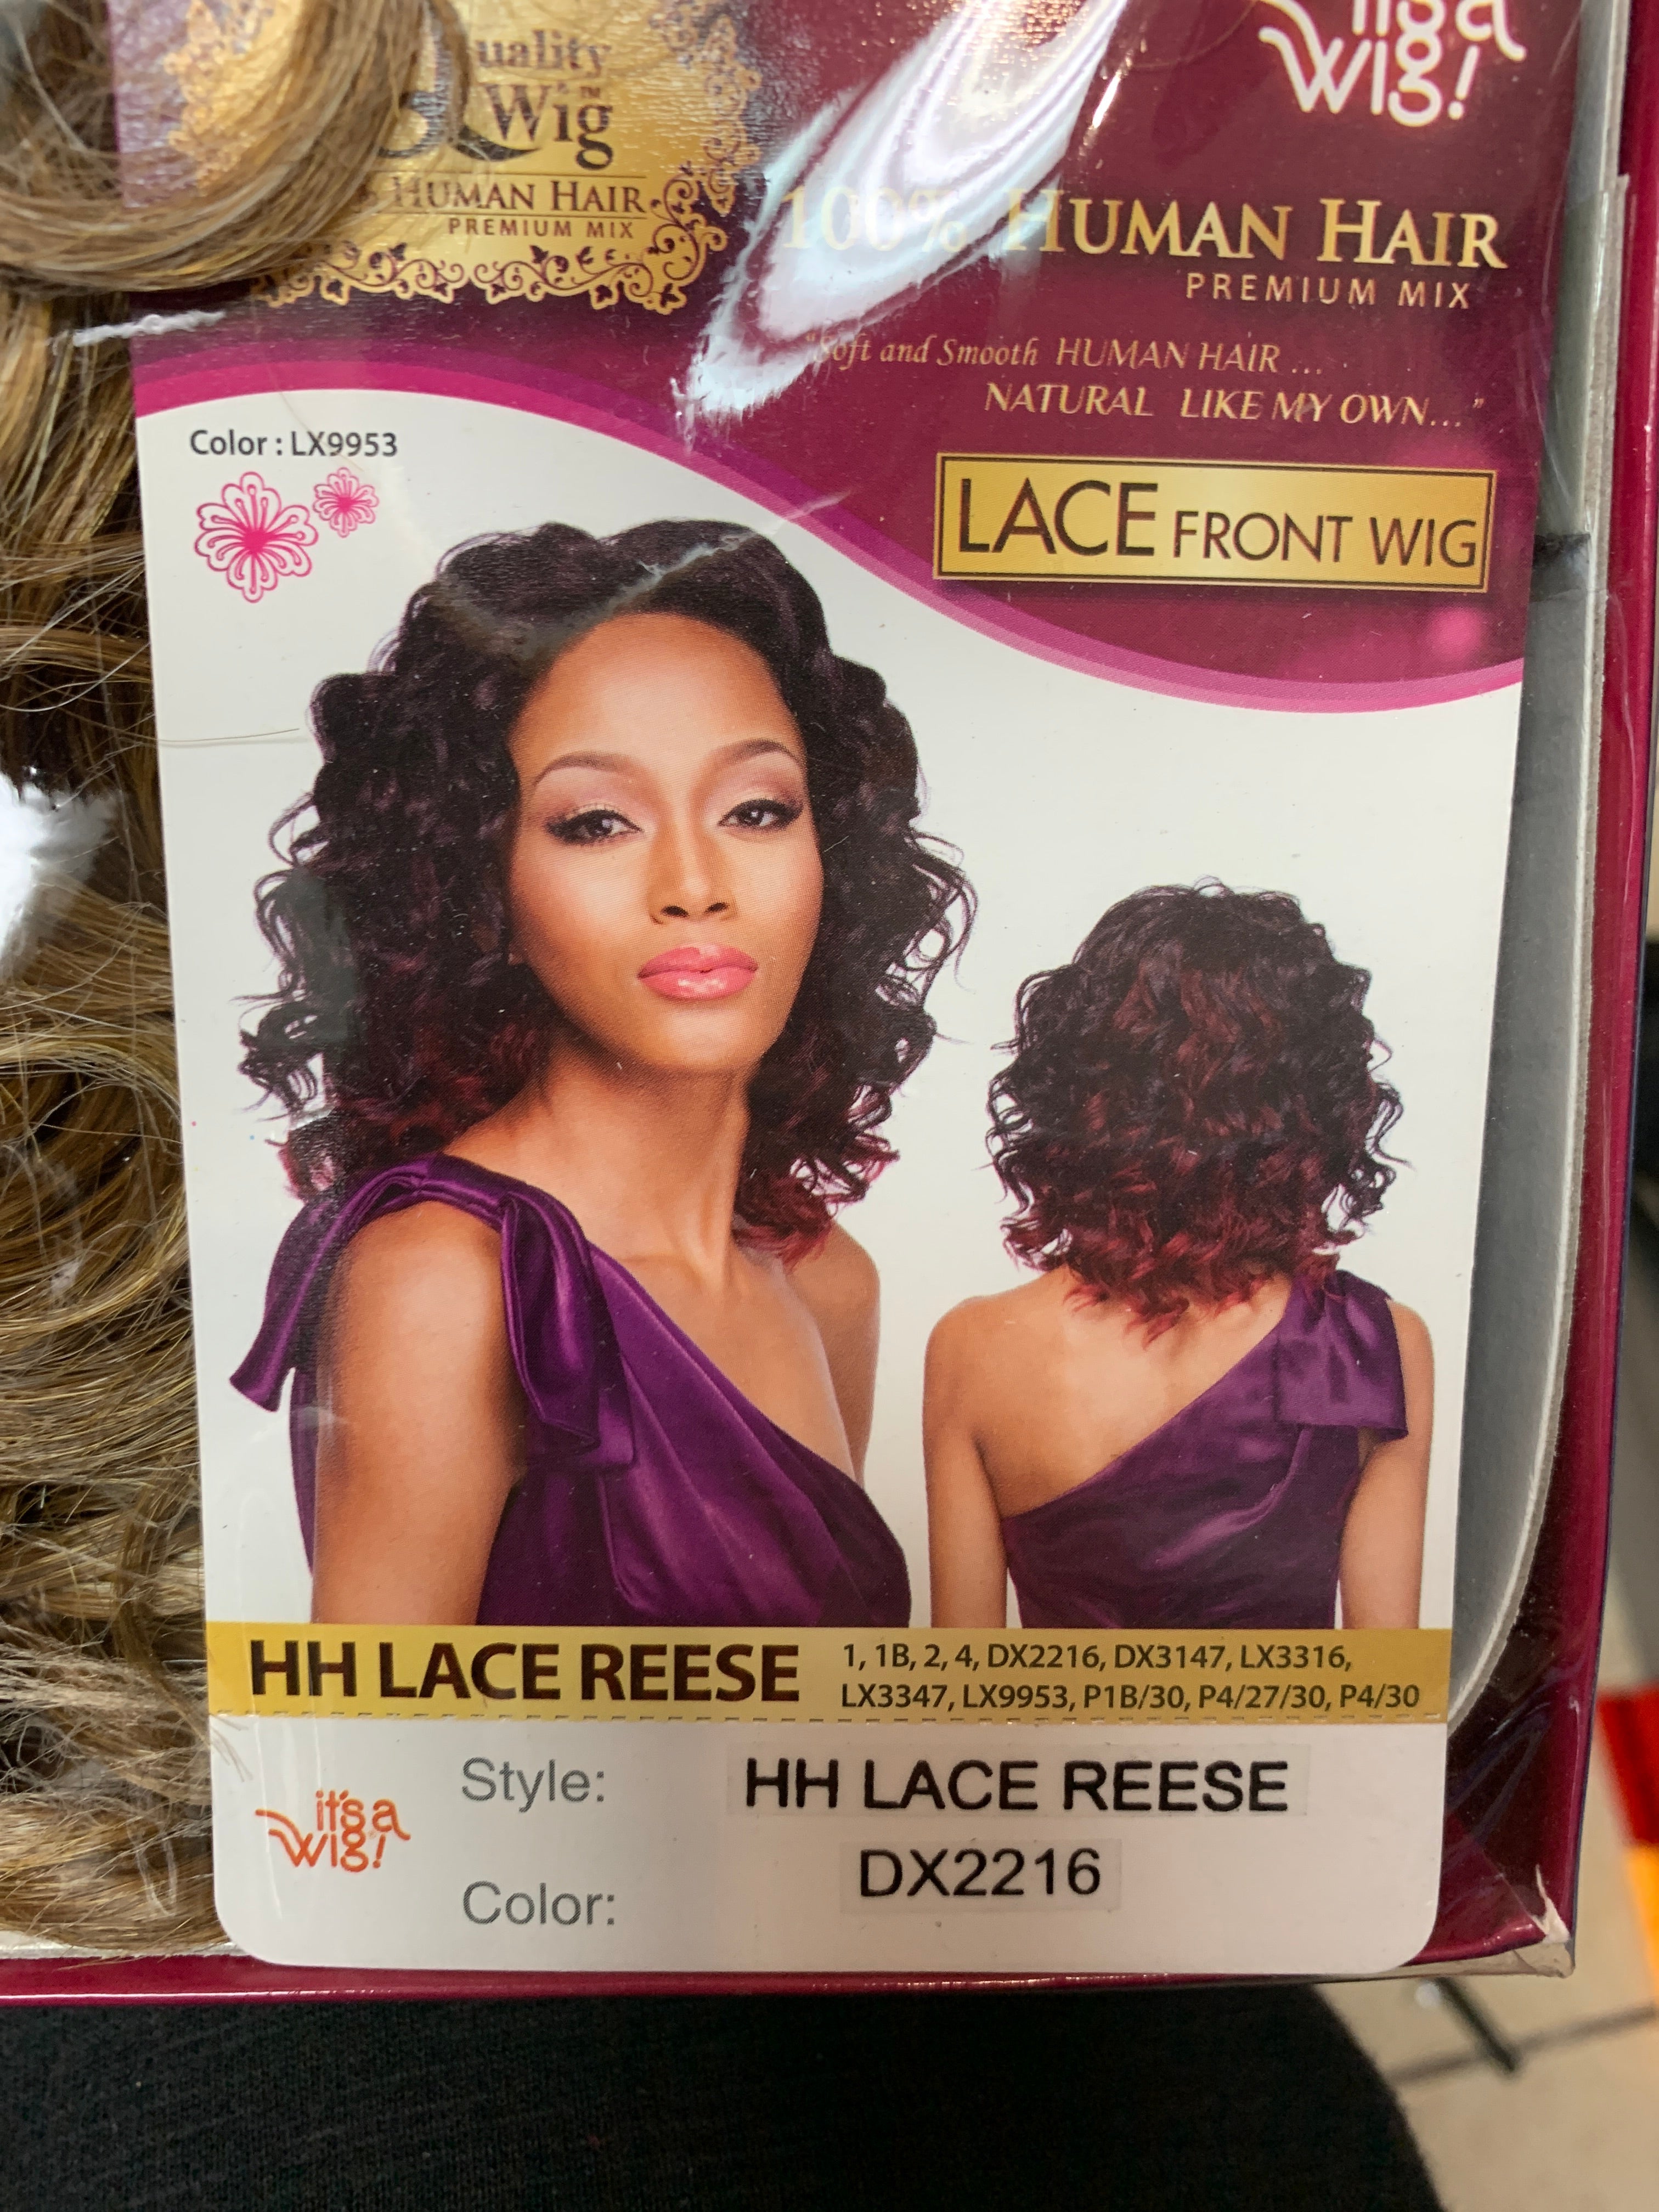 It’s a wig hh lace Reese